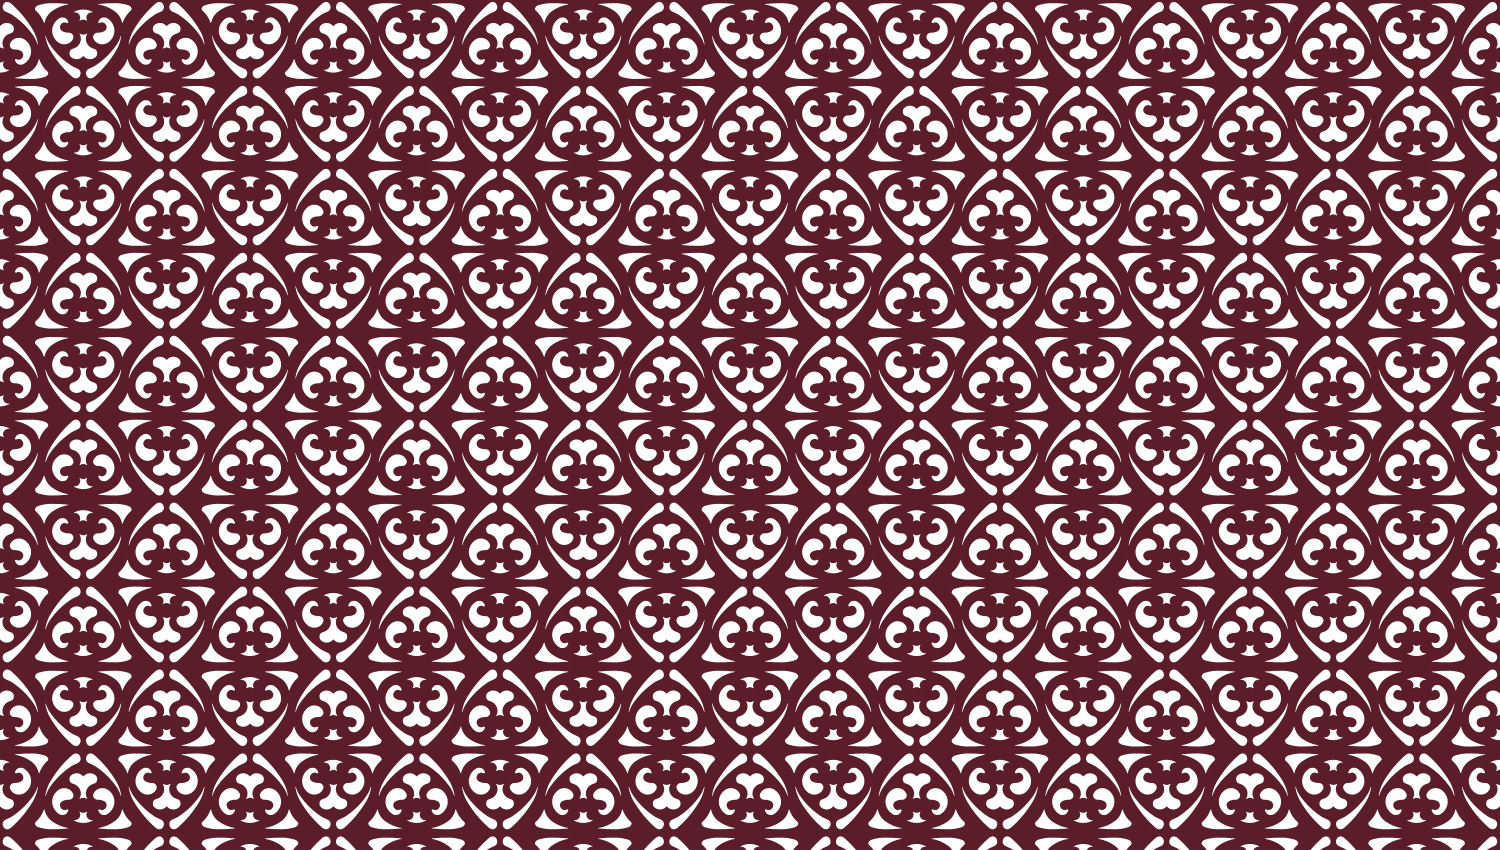 Parasoleil™ Flanigan© pattern displayed with a burgundy color overlay